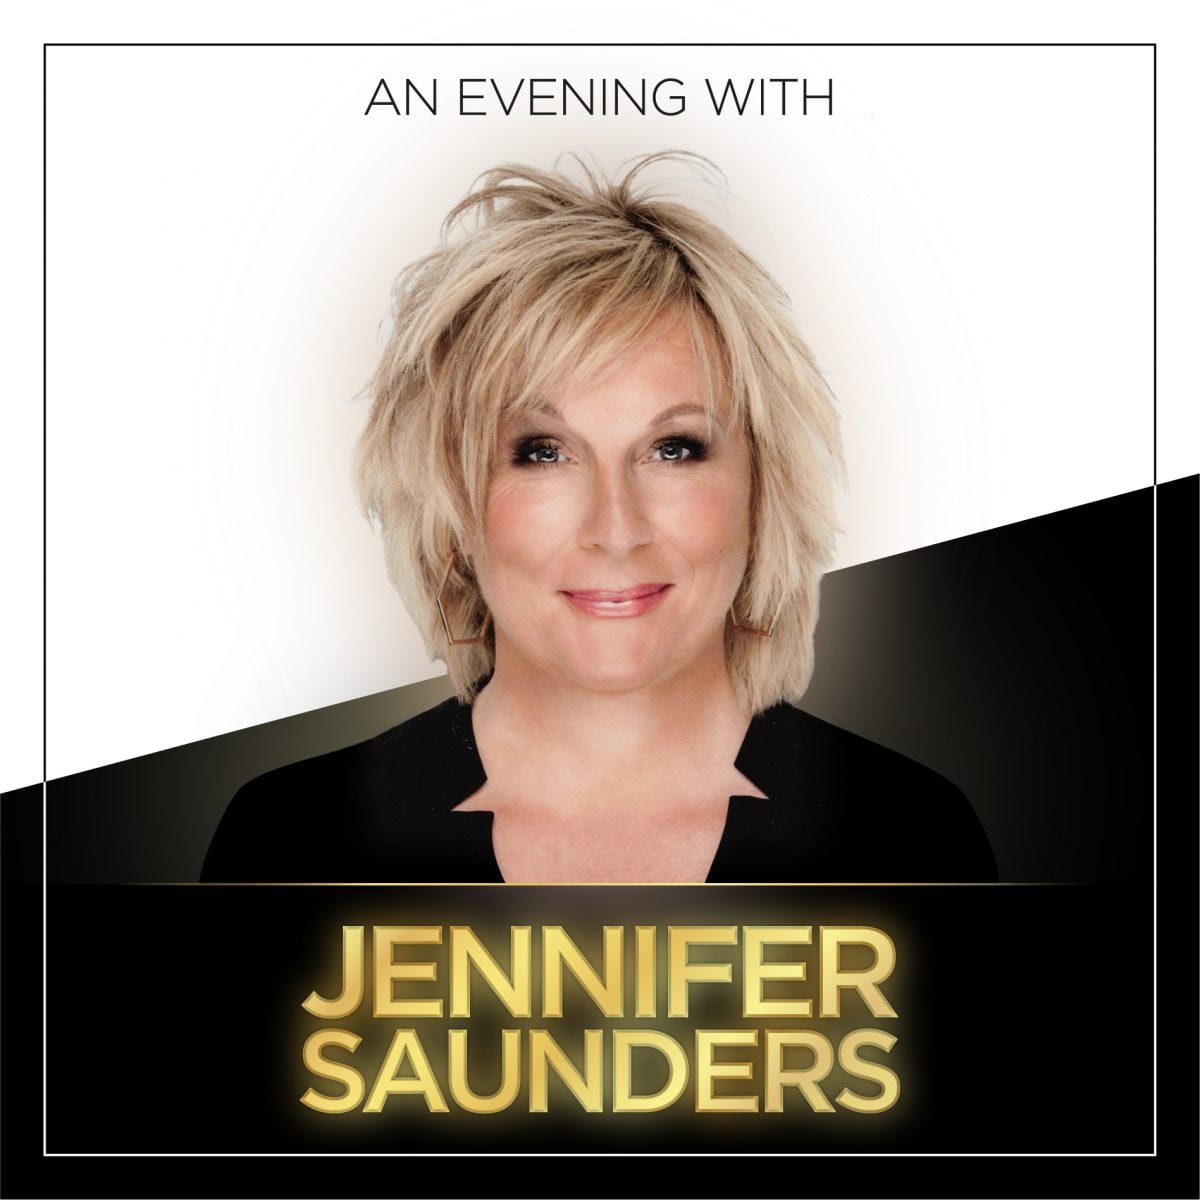 AN EVENING WITH JENNIFER SAUNDERS